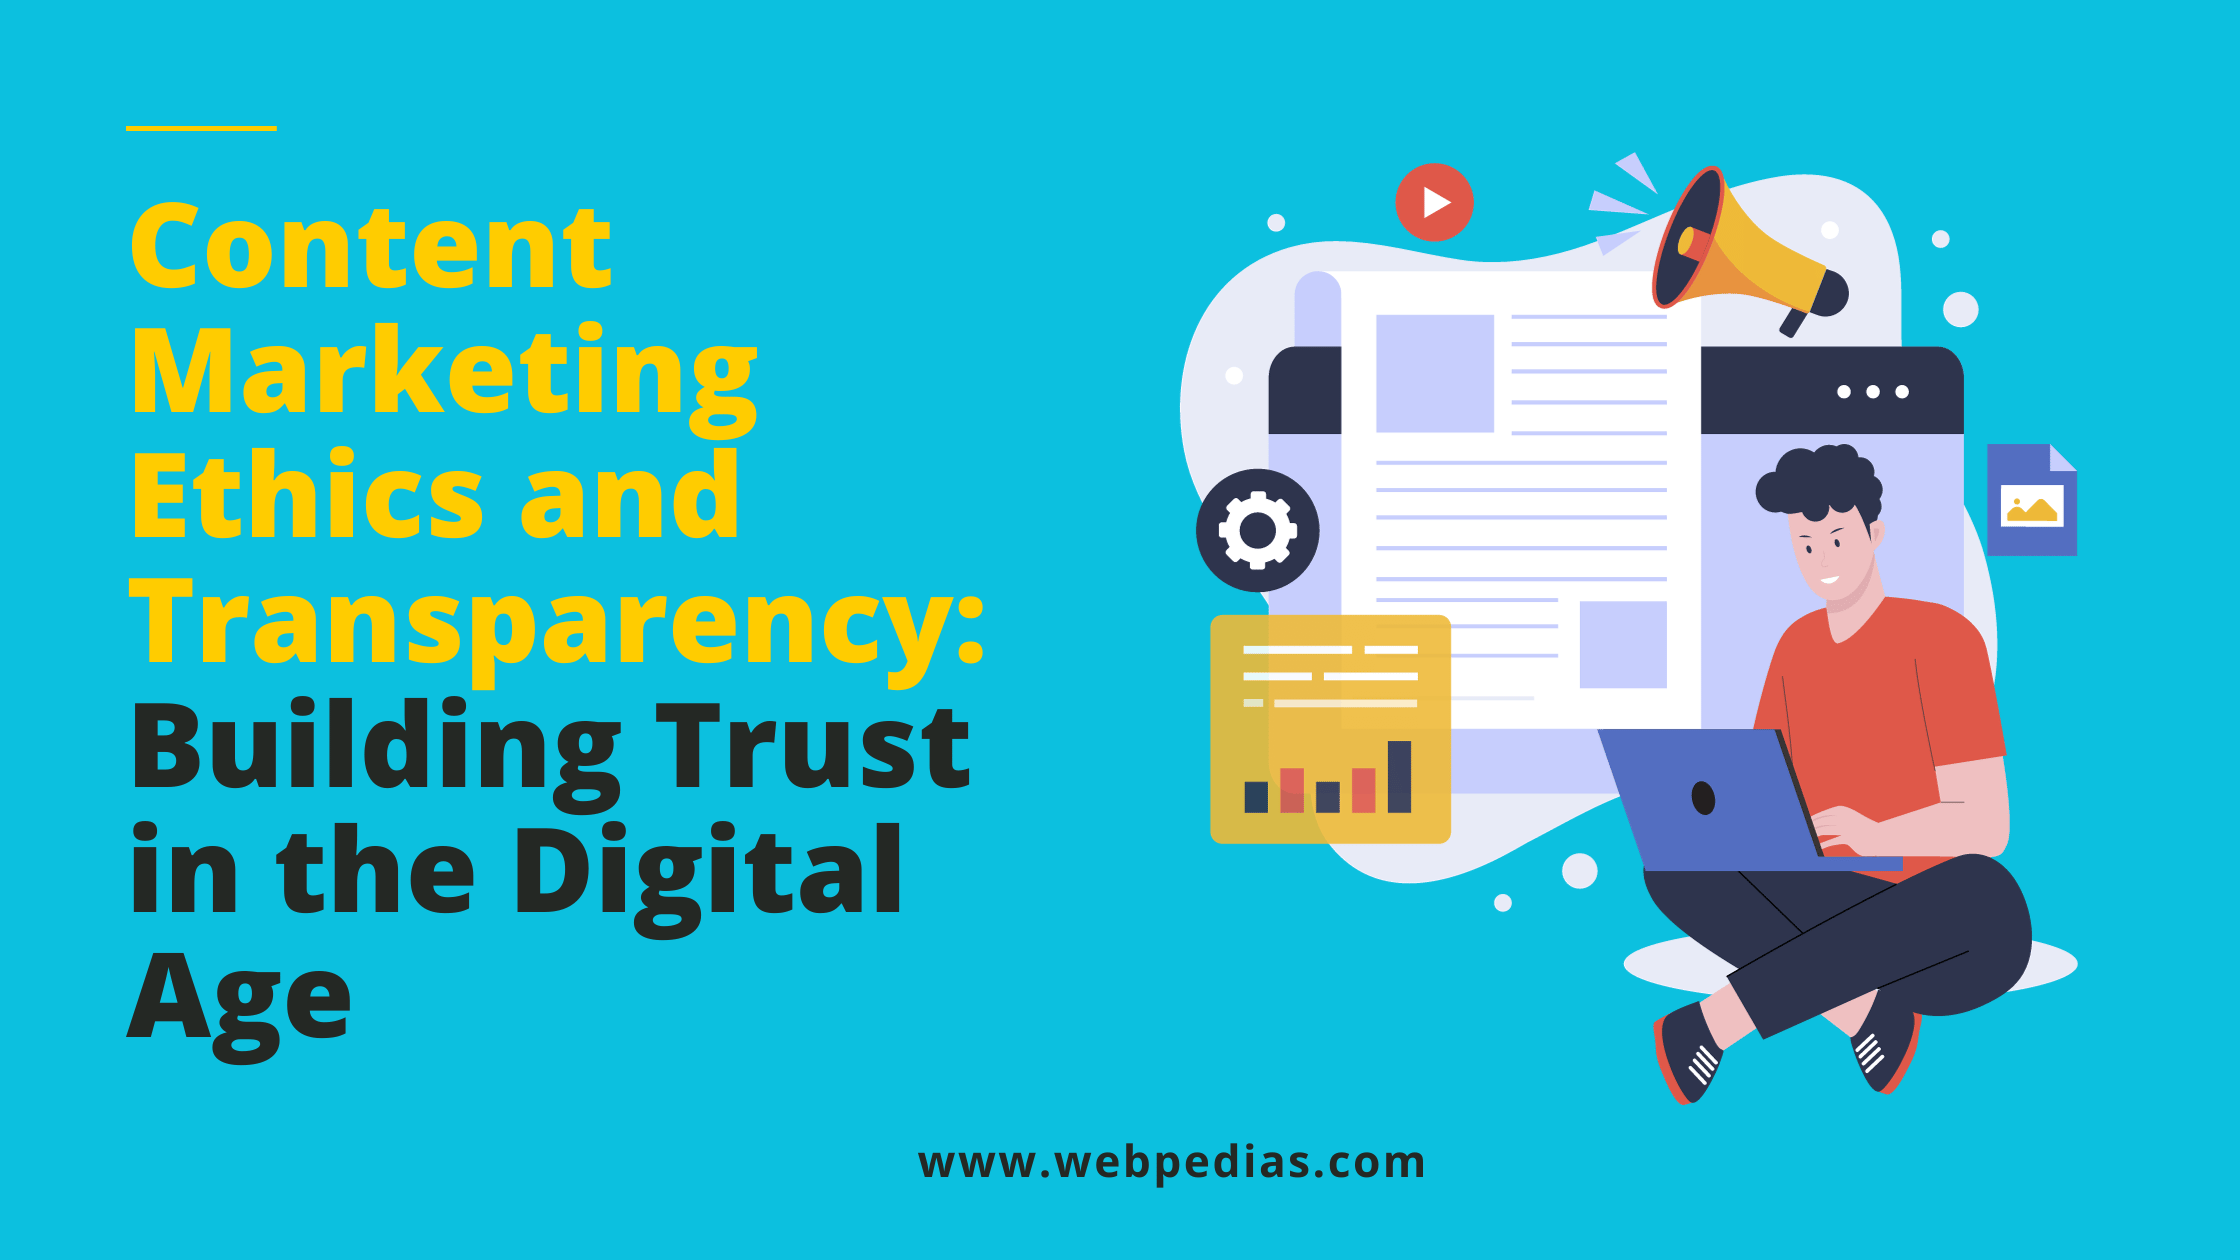 Content Marketing Ethics and Transparency: Building Trust in the Digital Age